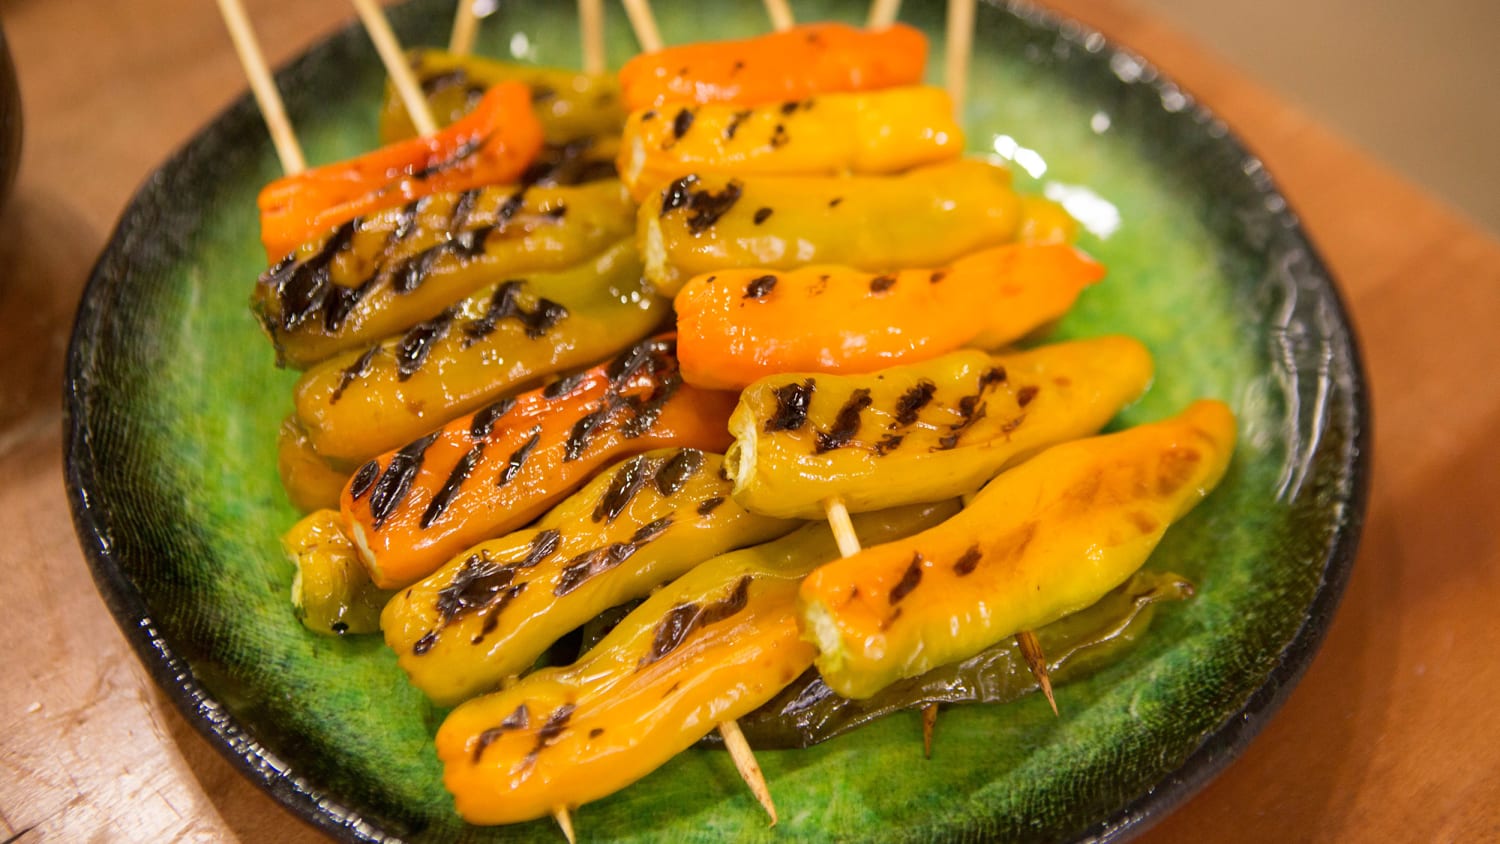 Grilled Skewered Shishito Peppers With Teriyaki Glaze Recipe